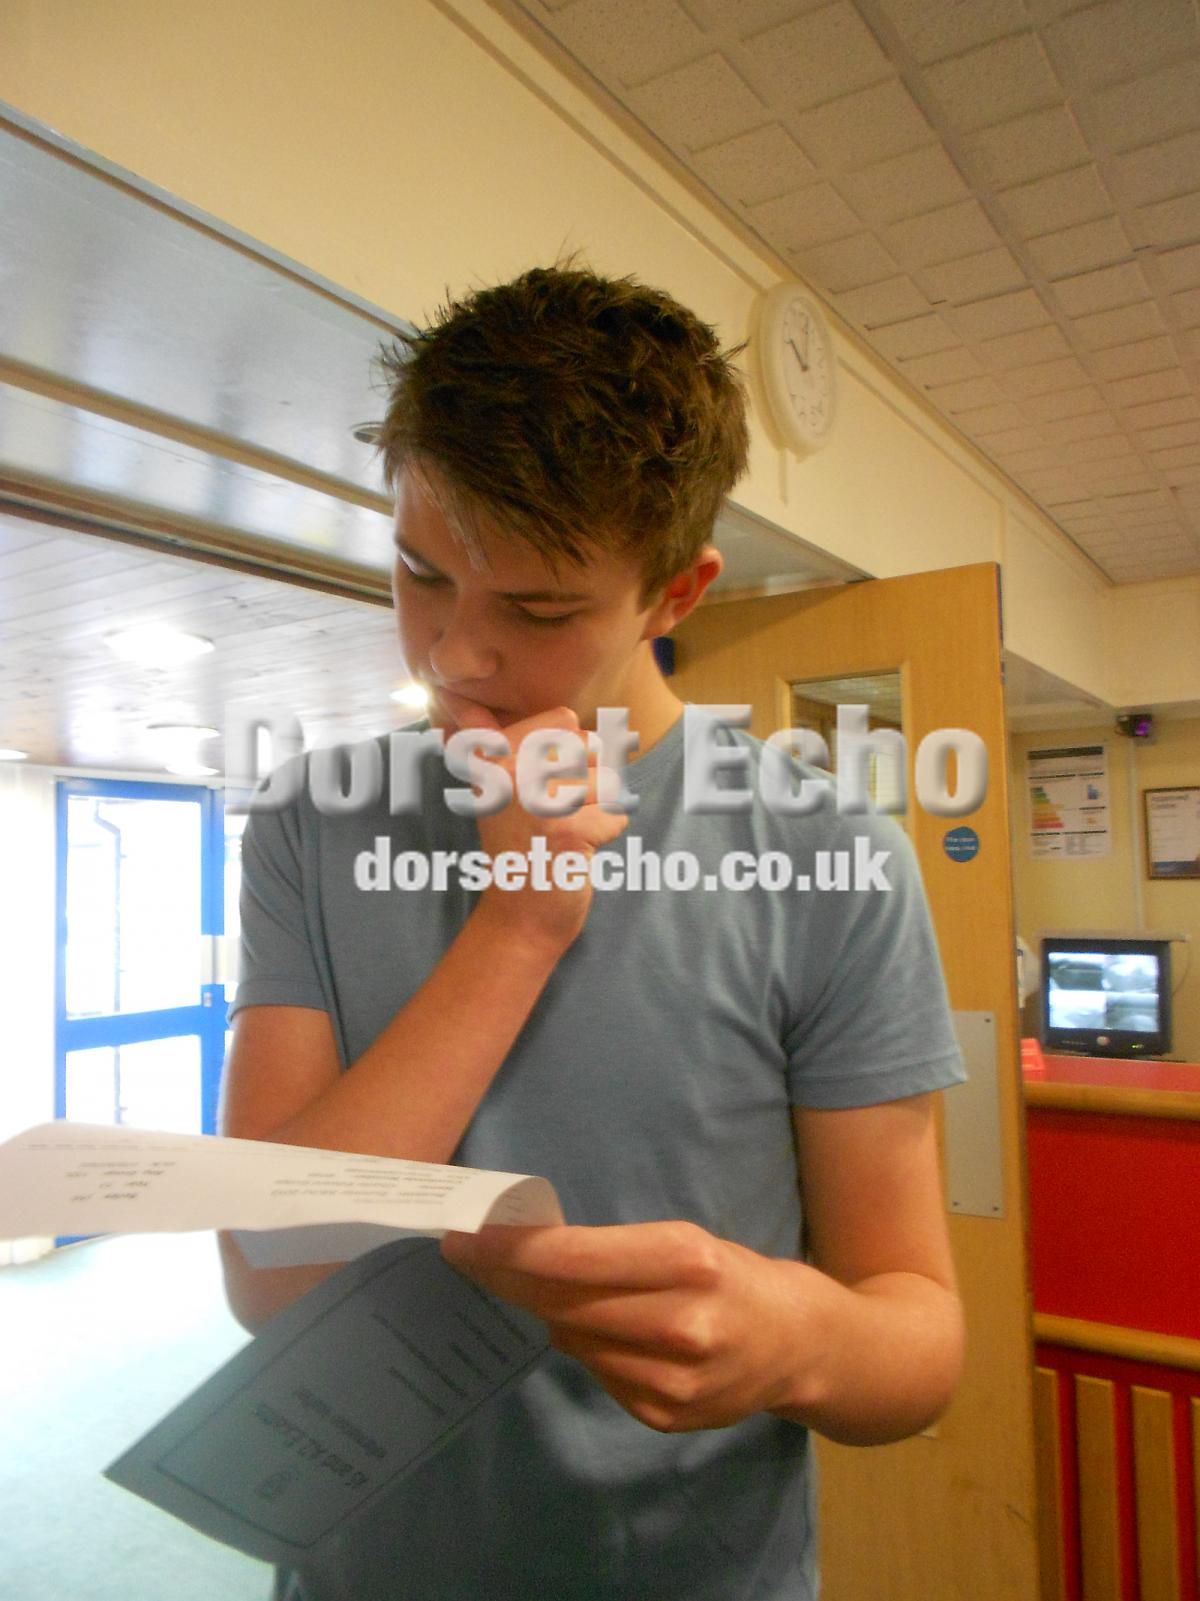 Beamister sixth form A level students with their results August 2013
Charlie Gudge BBC